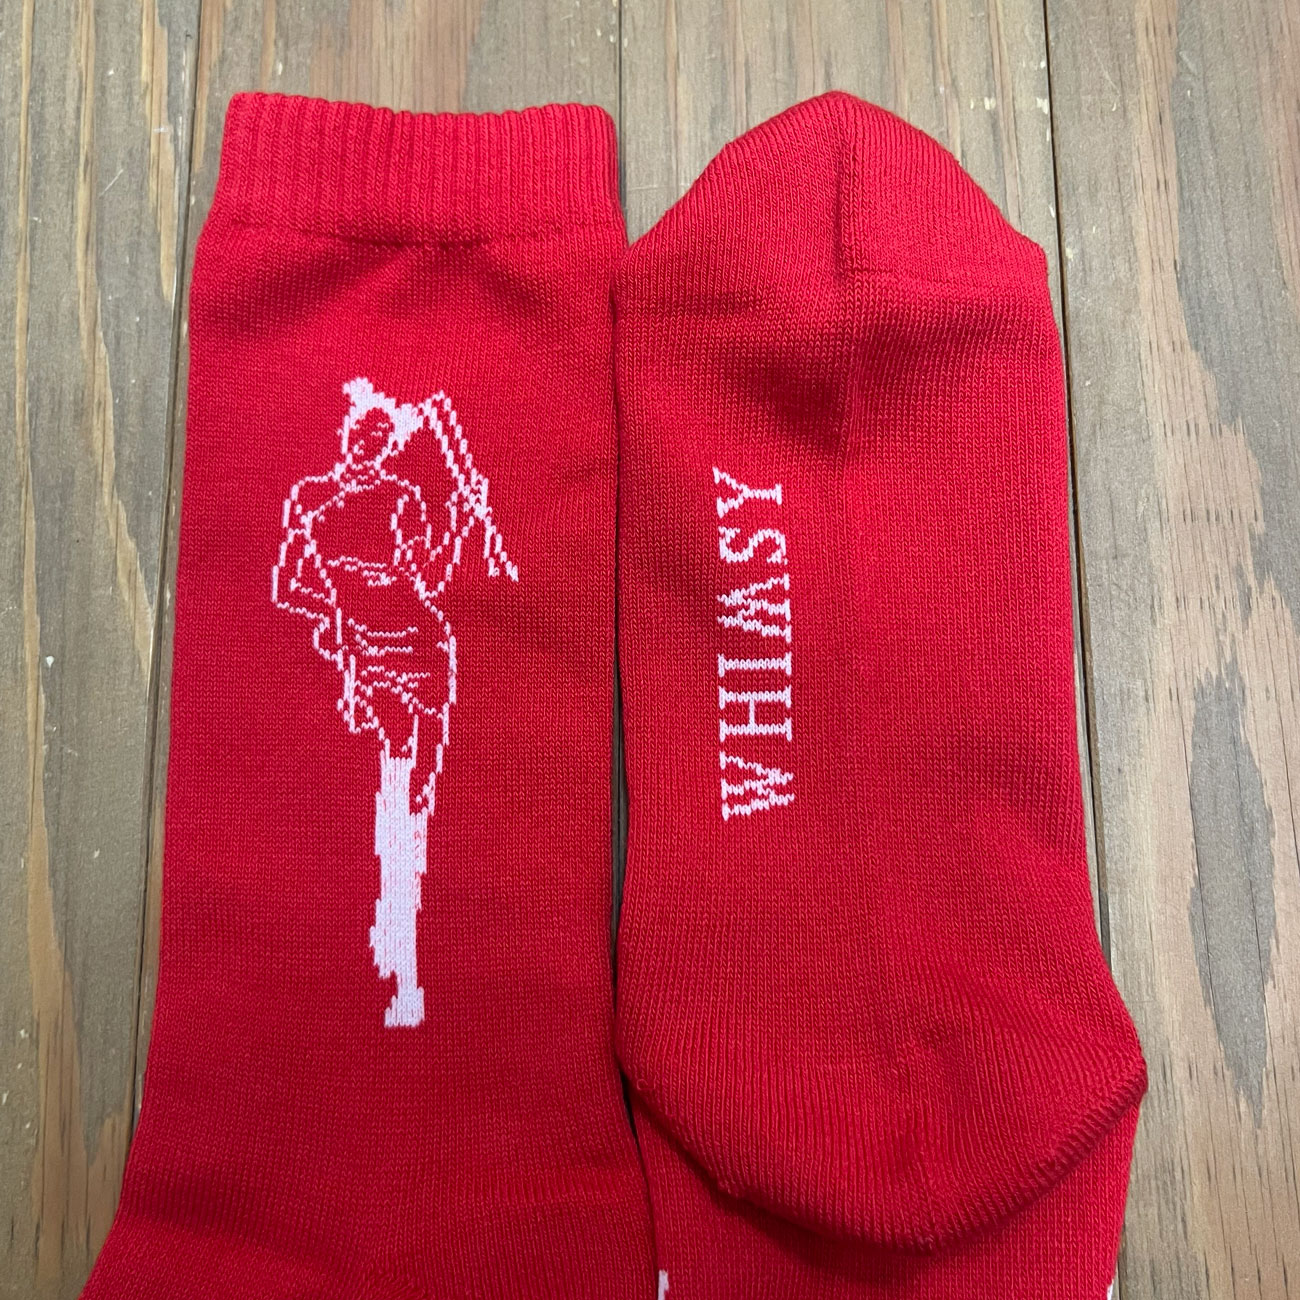 WHIMSY LANFAN SOX RED